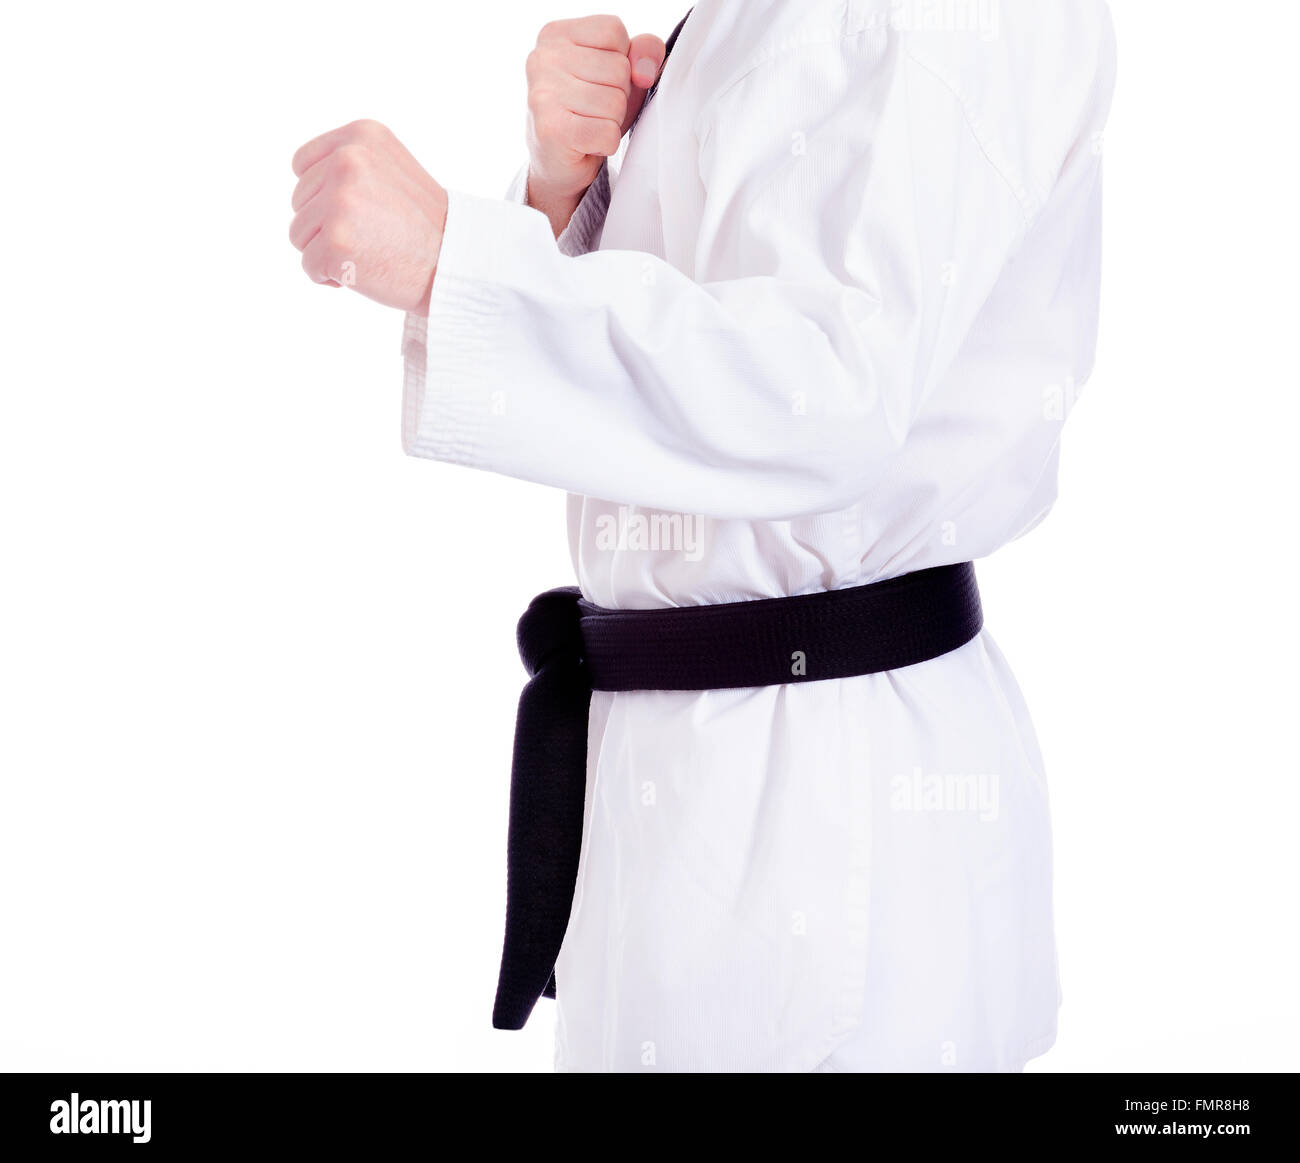 Black belt man practicing martial arts, isolated on white Stock Photo